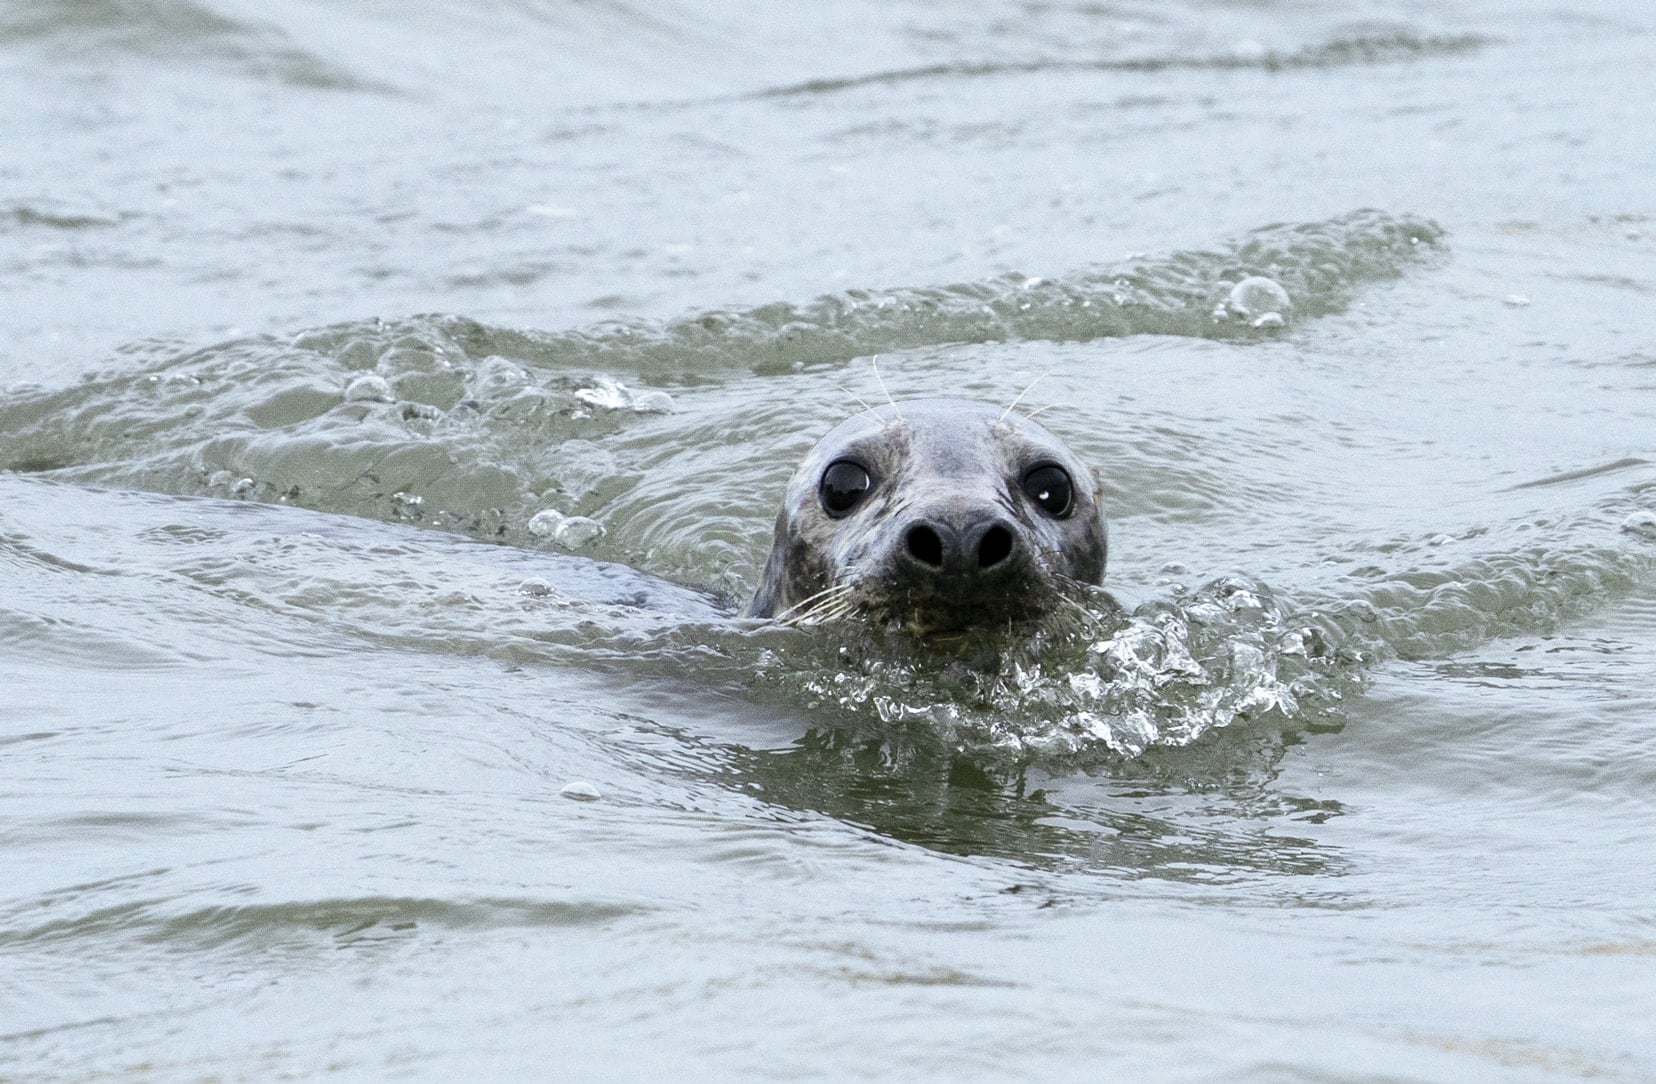 Seal being nosy with his head out of the water